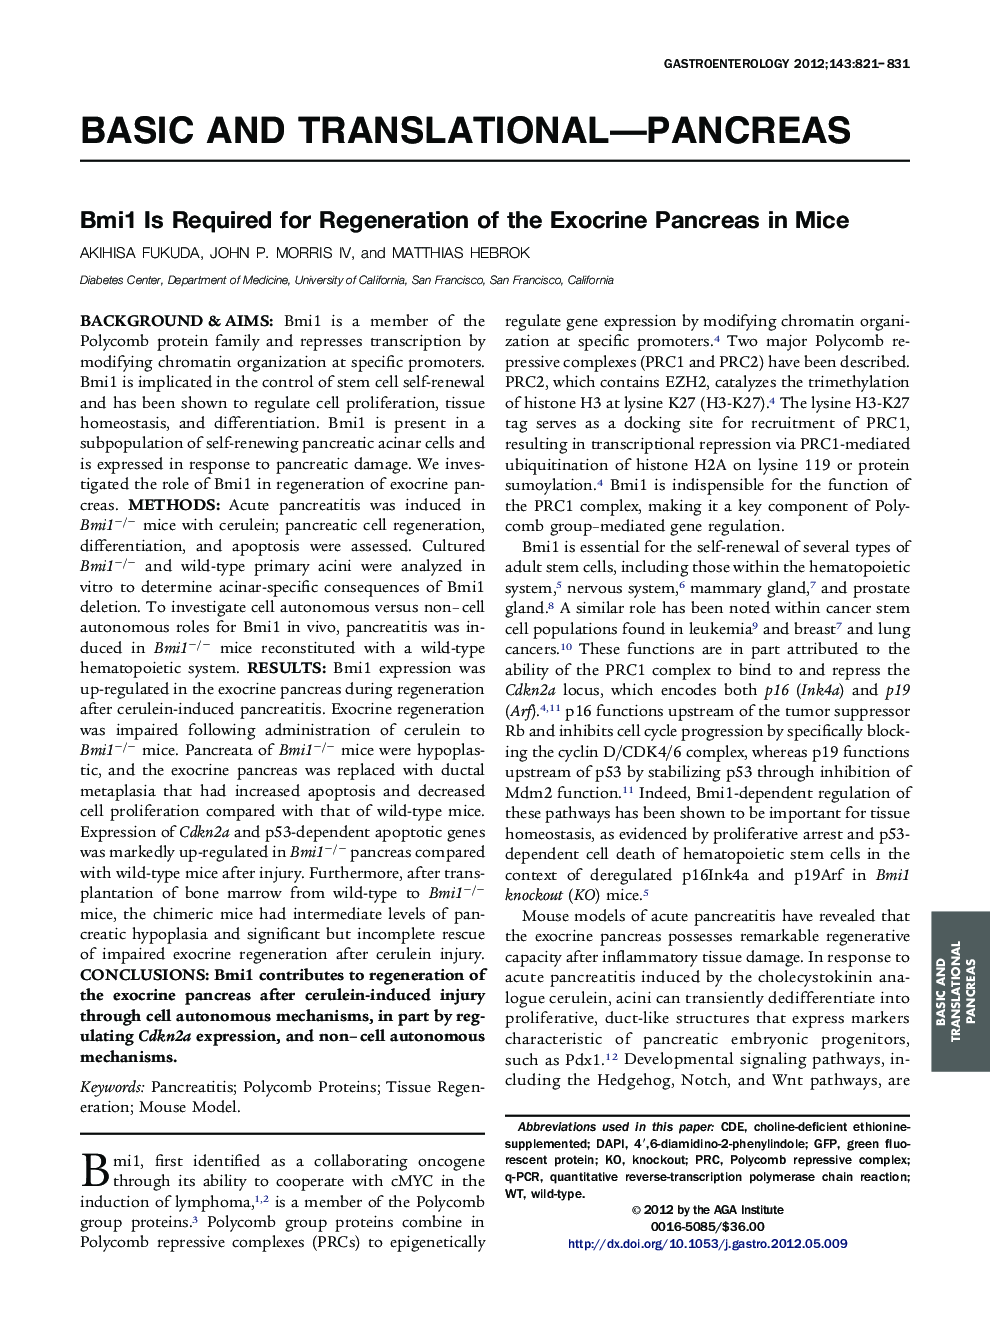 Bmi1 Is Required for Regeneration of the Exocrine Pancreas in Mice